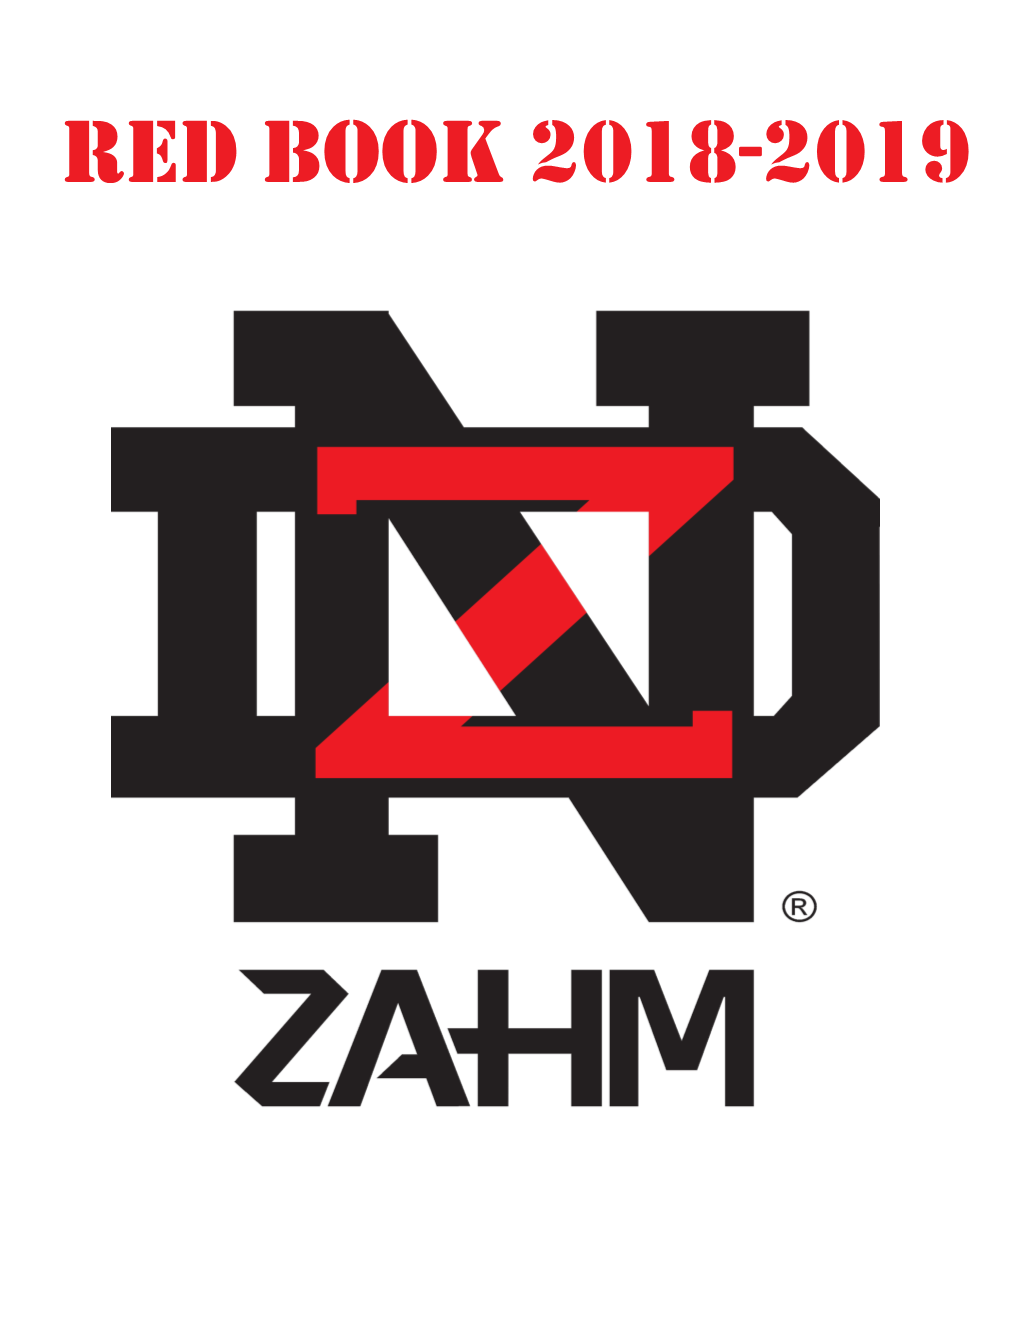 Red Book 2018-2019 ZAHM HOUSE 2